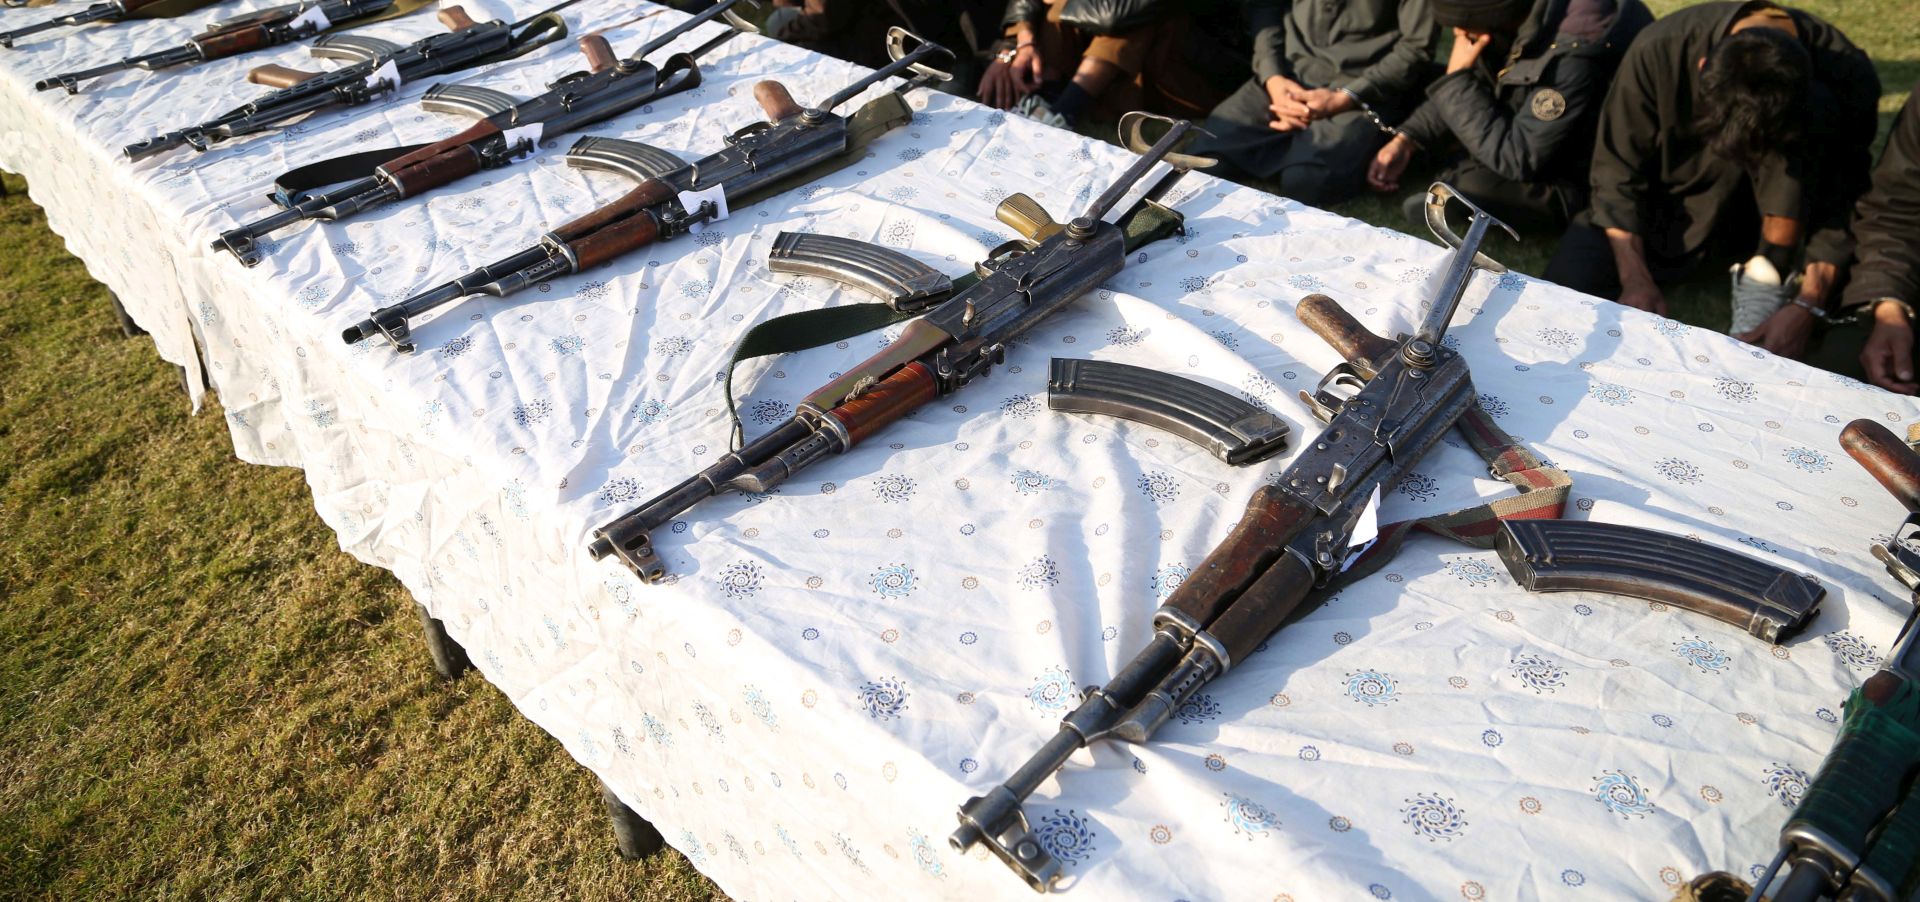 epa08046512 Former militants surrender their weapons during a reconciliation ceremony in Jalalabad, Afghanistan, 05 December 2019. A group of 180 former Taliban and Islamic State (IS) members on 05 December laid down their arms in Jalalabad and joined the peace process. Under an amnesty launched by former President Hamid Karzai and backed by the US in November 2004, hundreds of anti-government militants have surrendered to the government.  EPA/GHULAMULLAH HABIBI